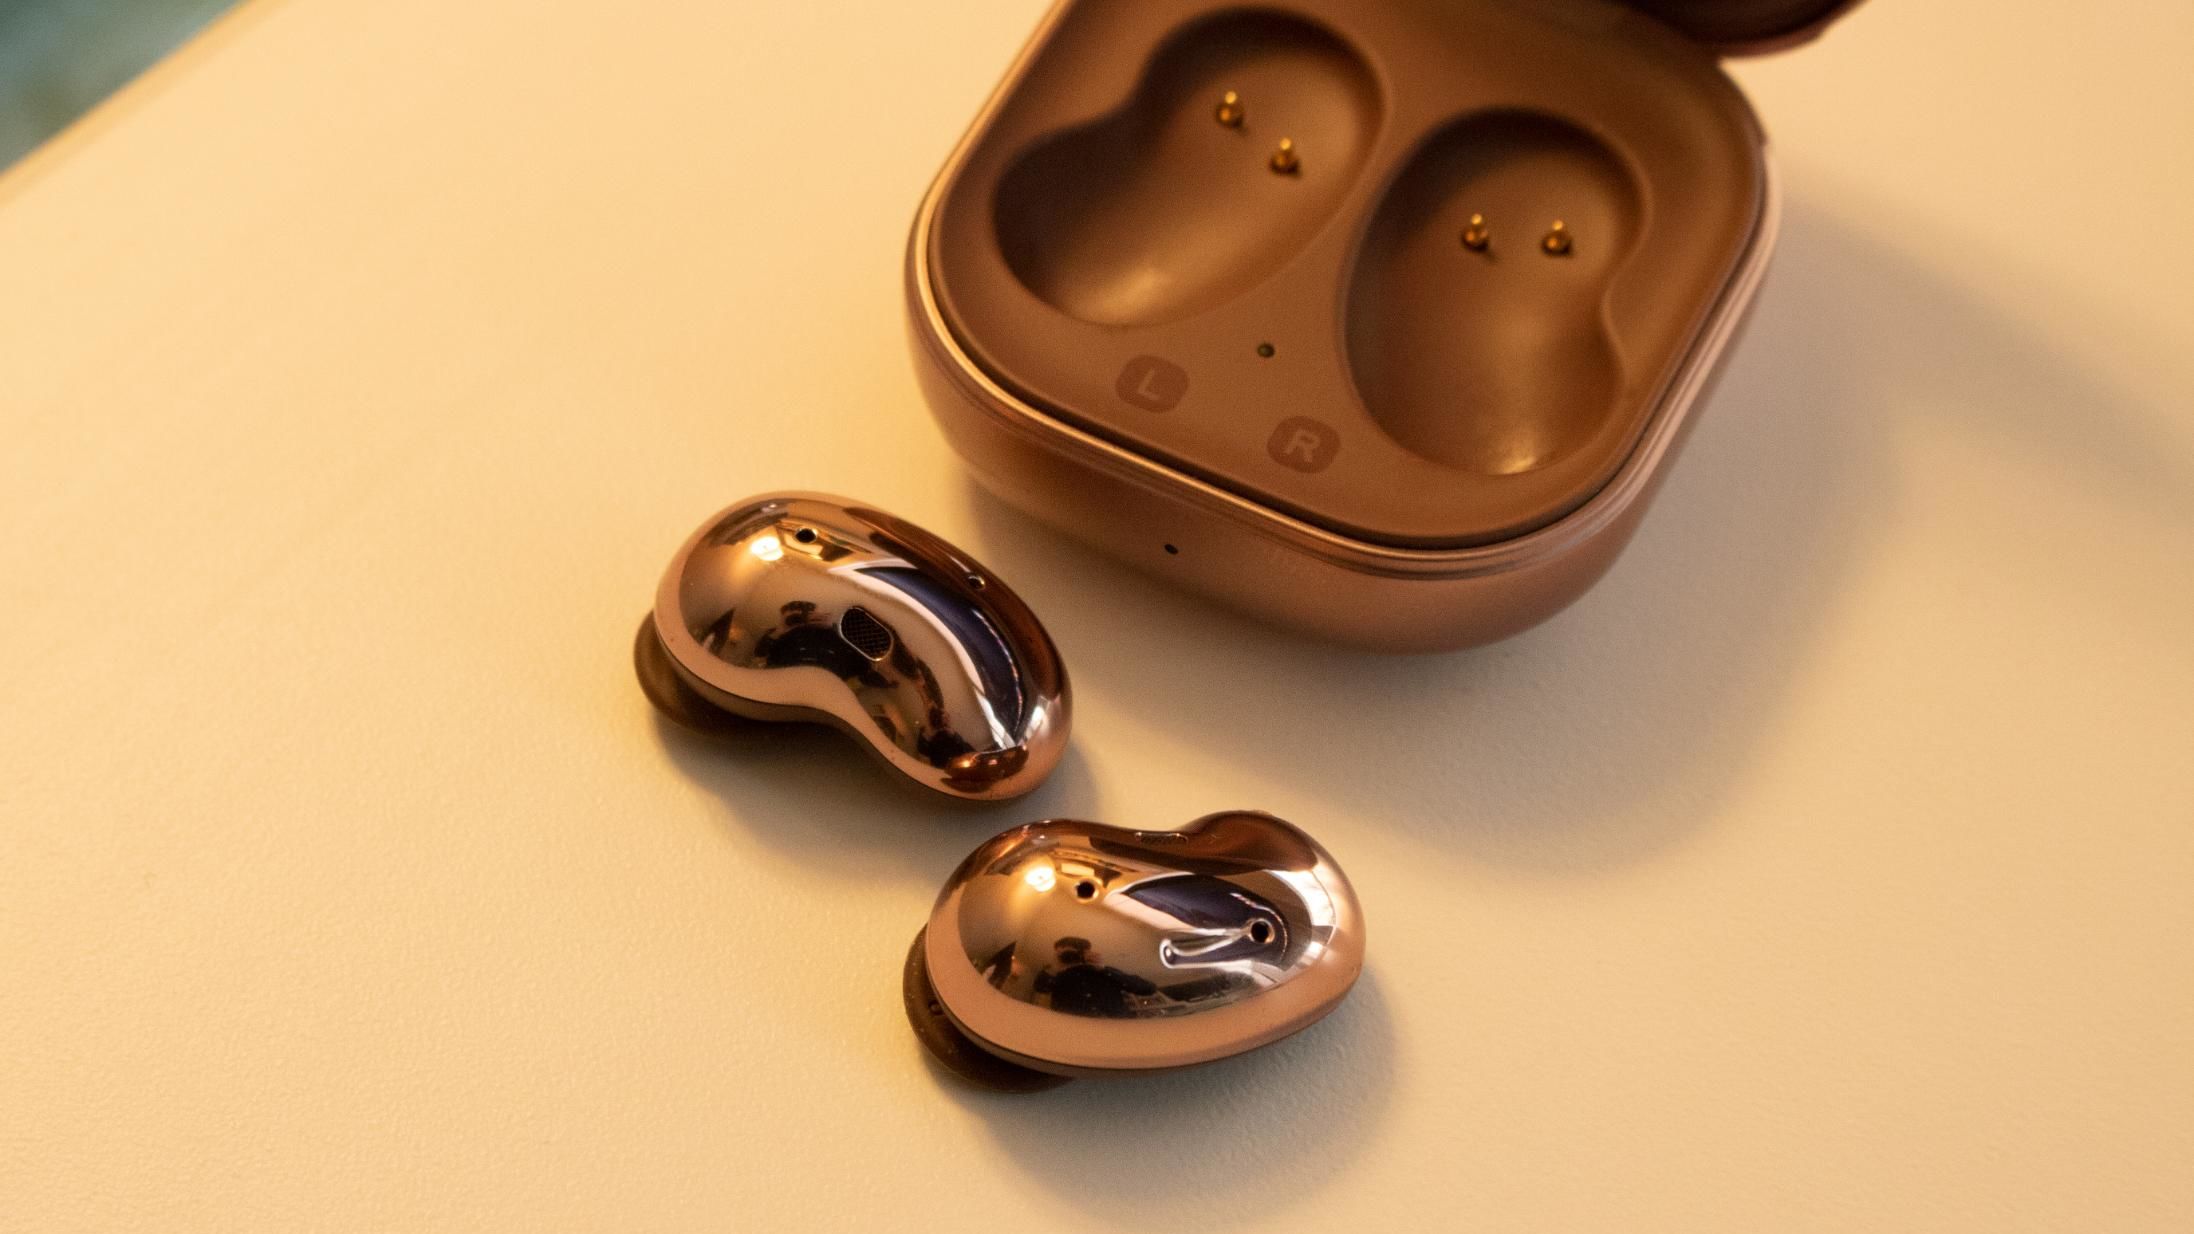 Samsung Galaxy Buds Live review: best to date, but not perfect